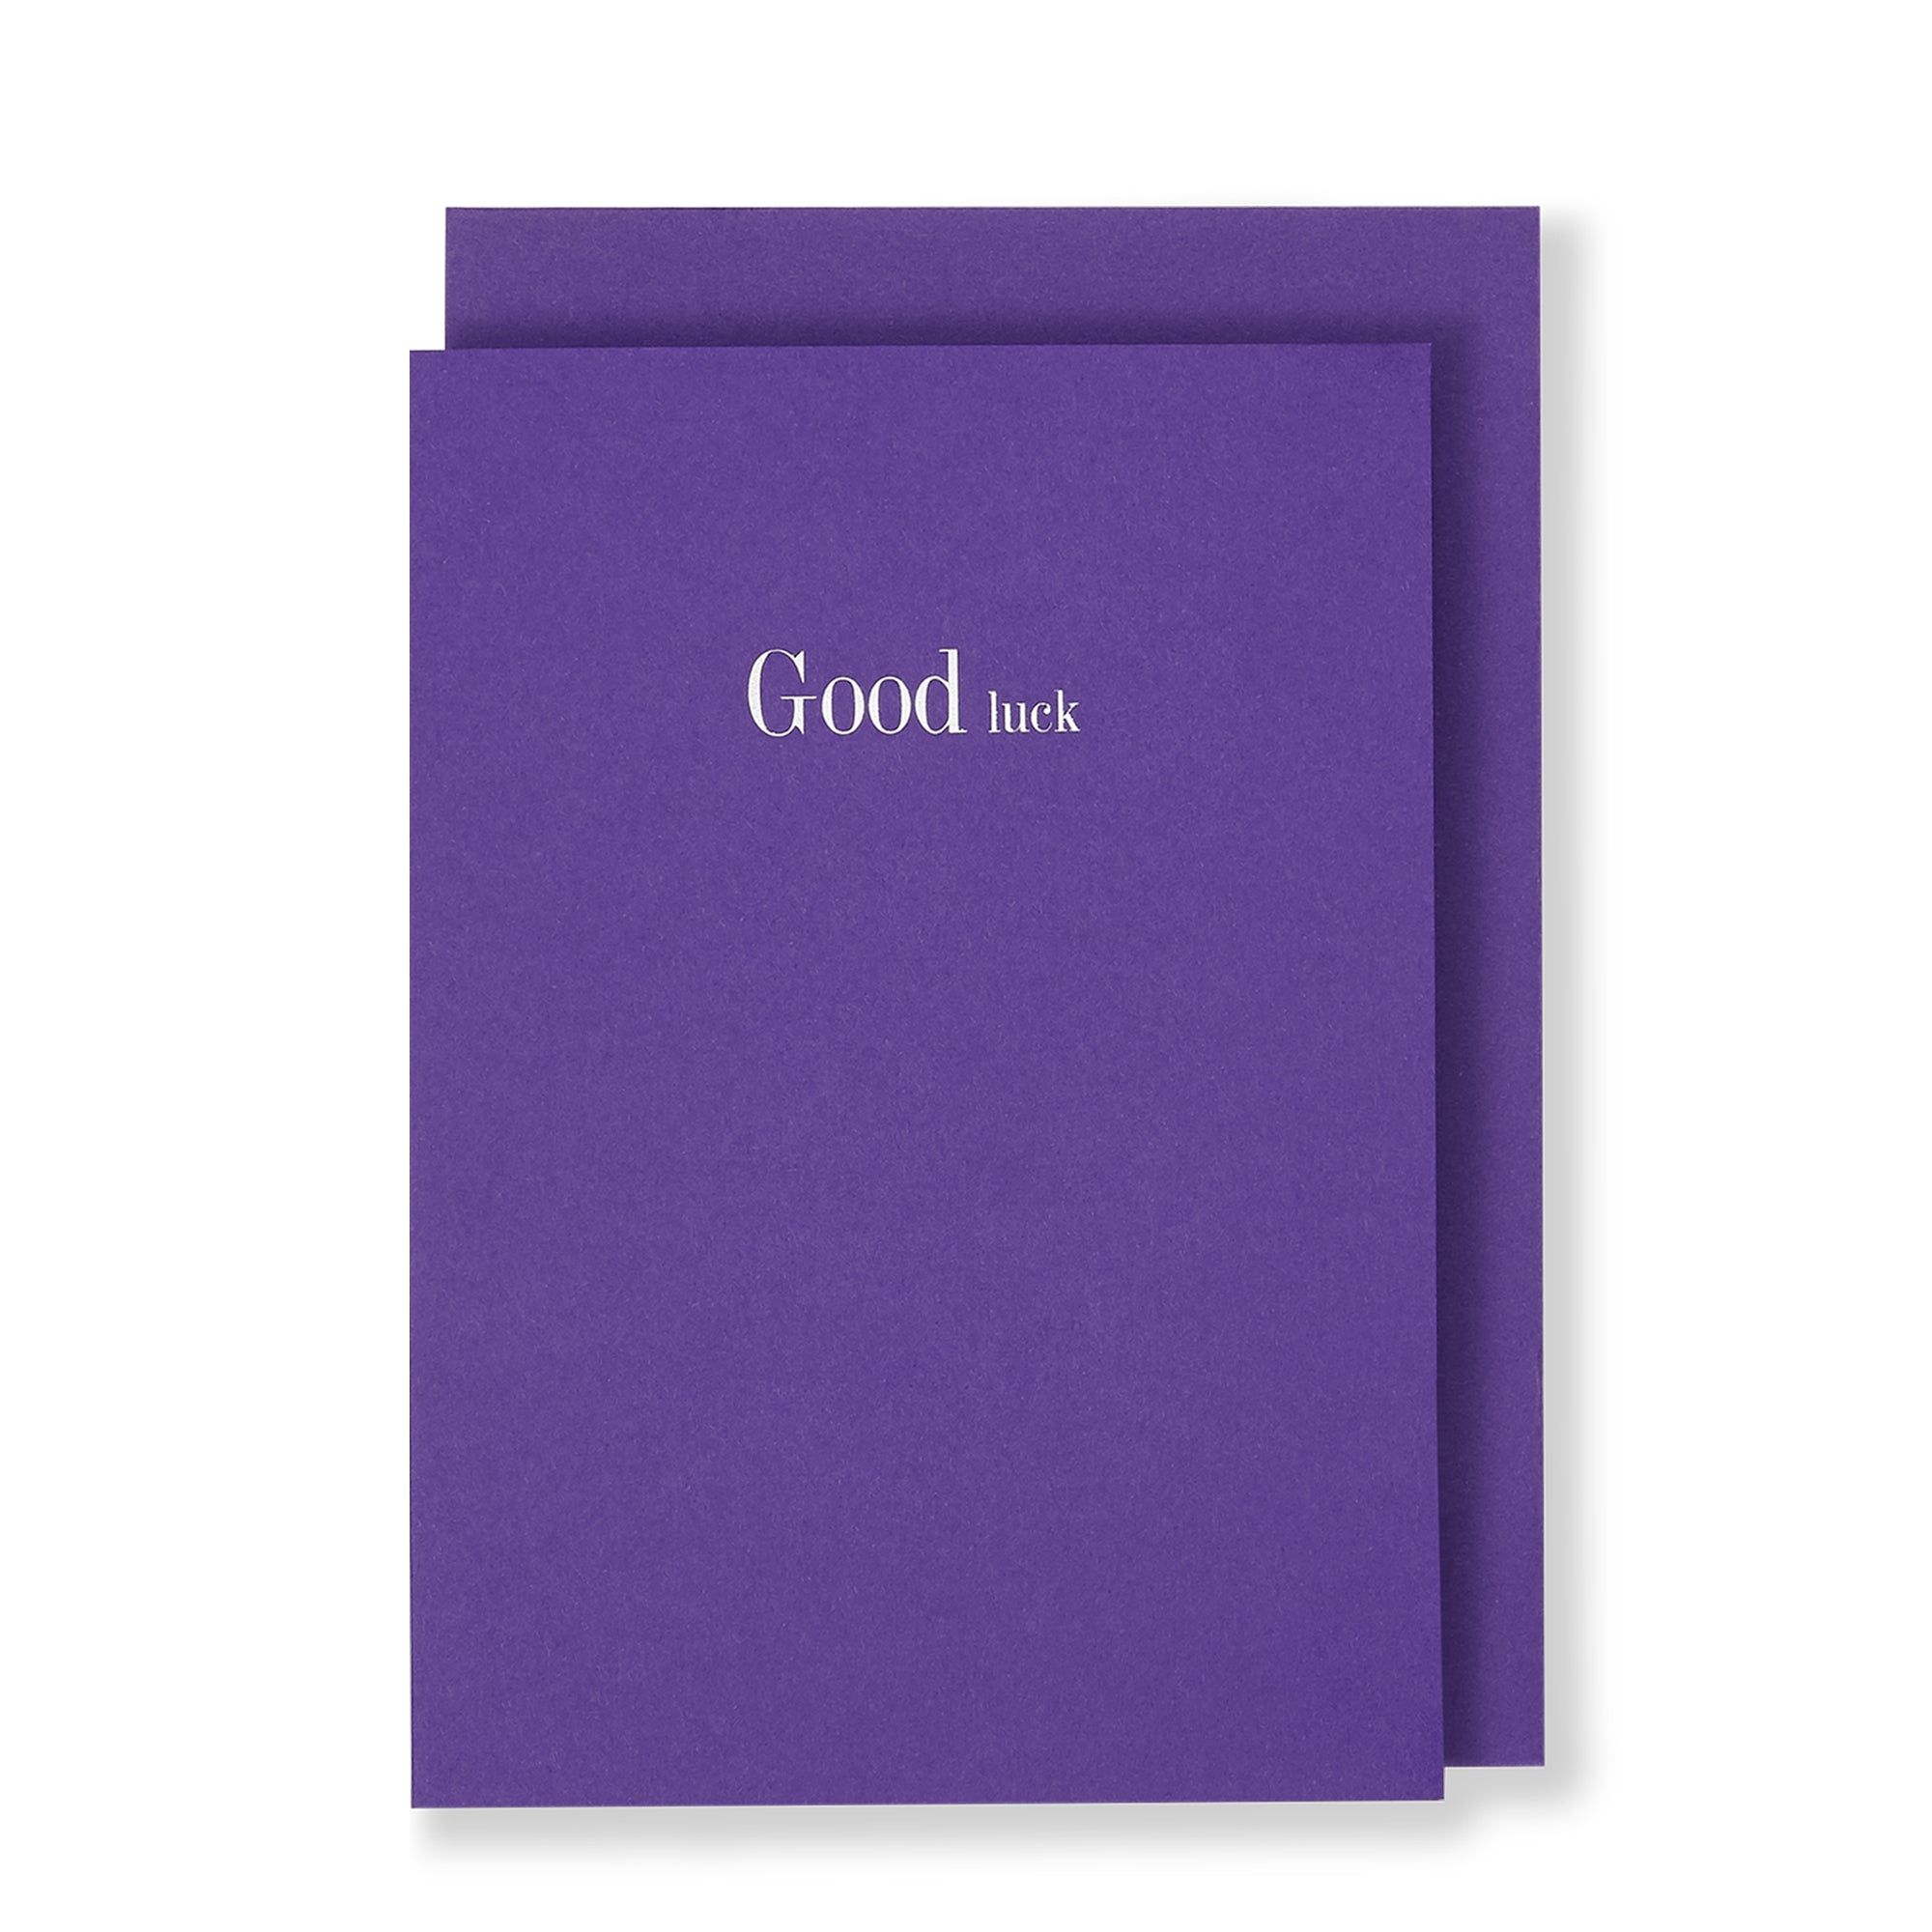 Good Luck Greeting Card in Warm Purple, Front